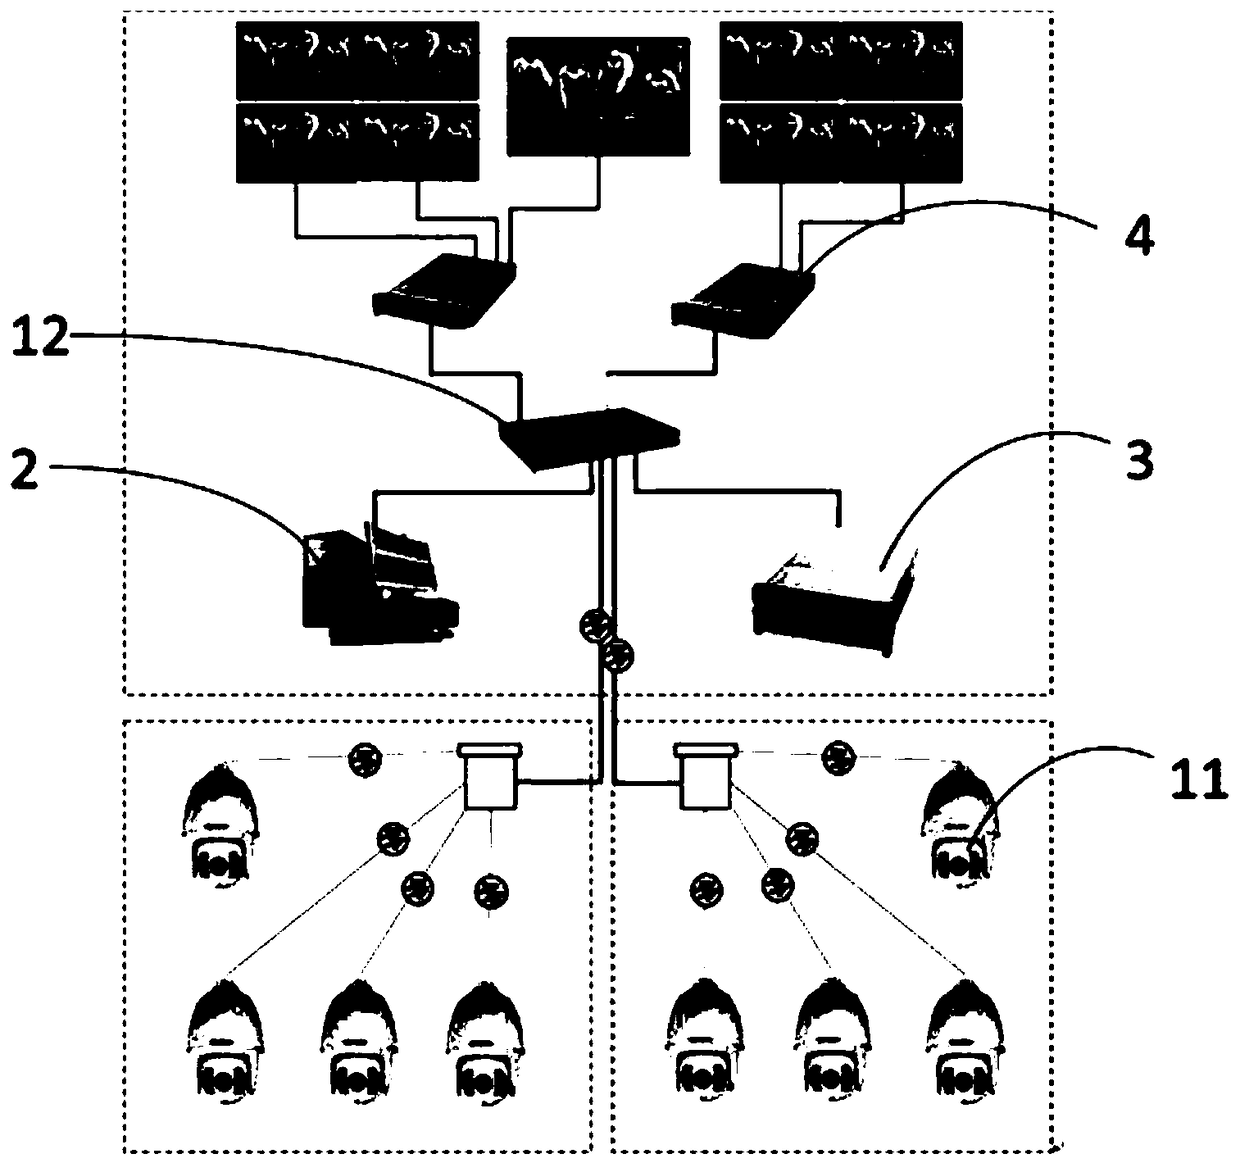 A pedestrian re-identification monitoring system based on a depth convolution neural network